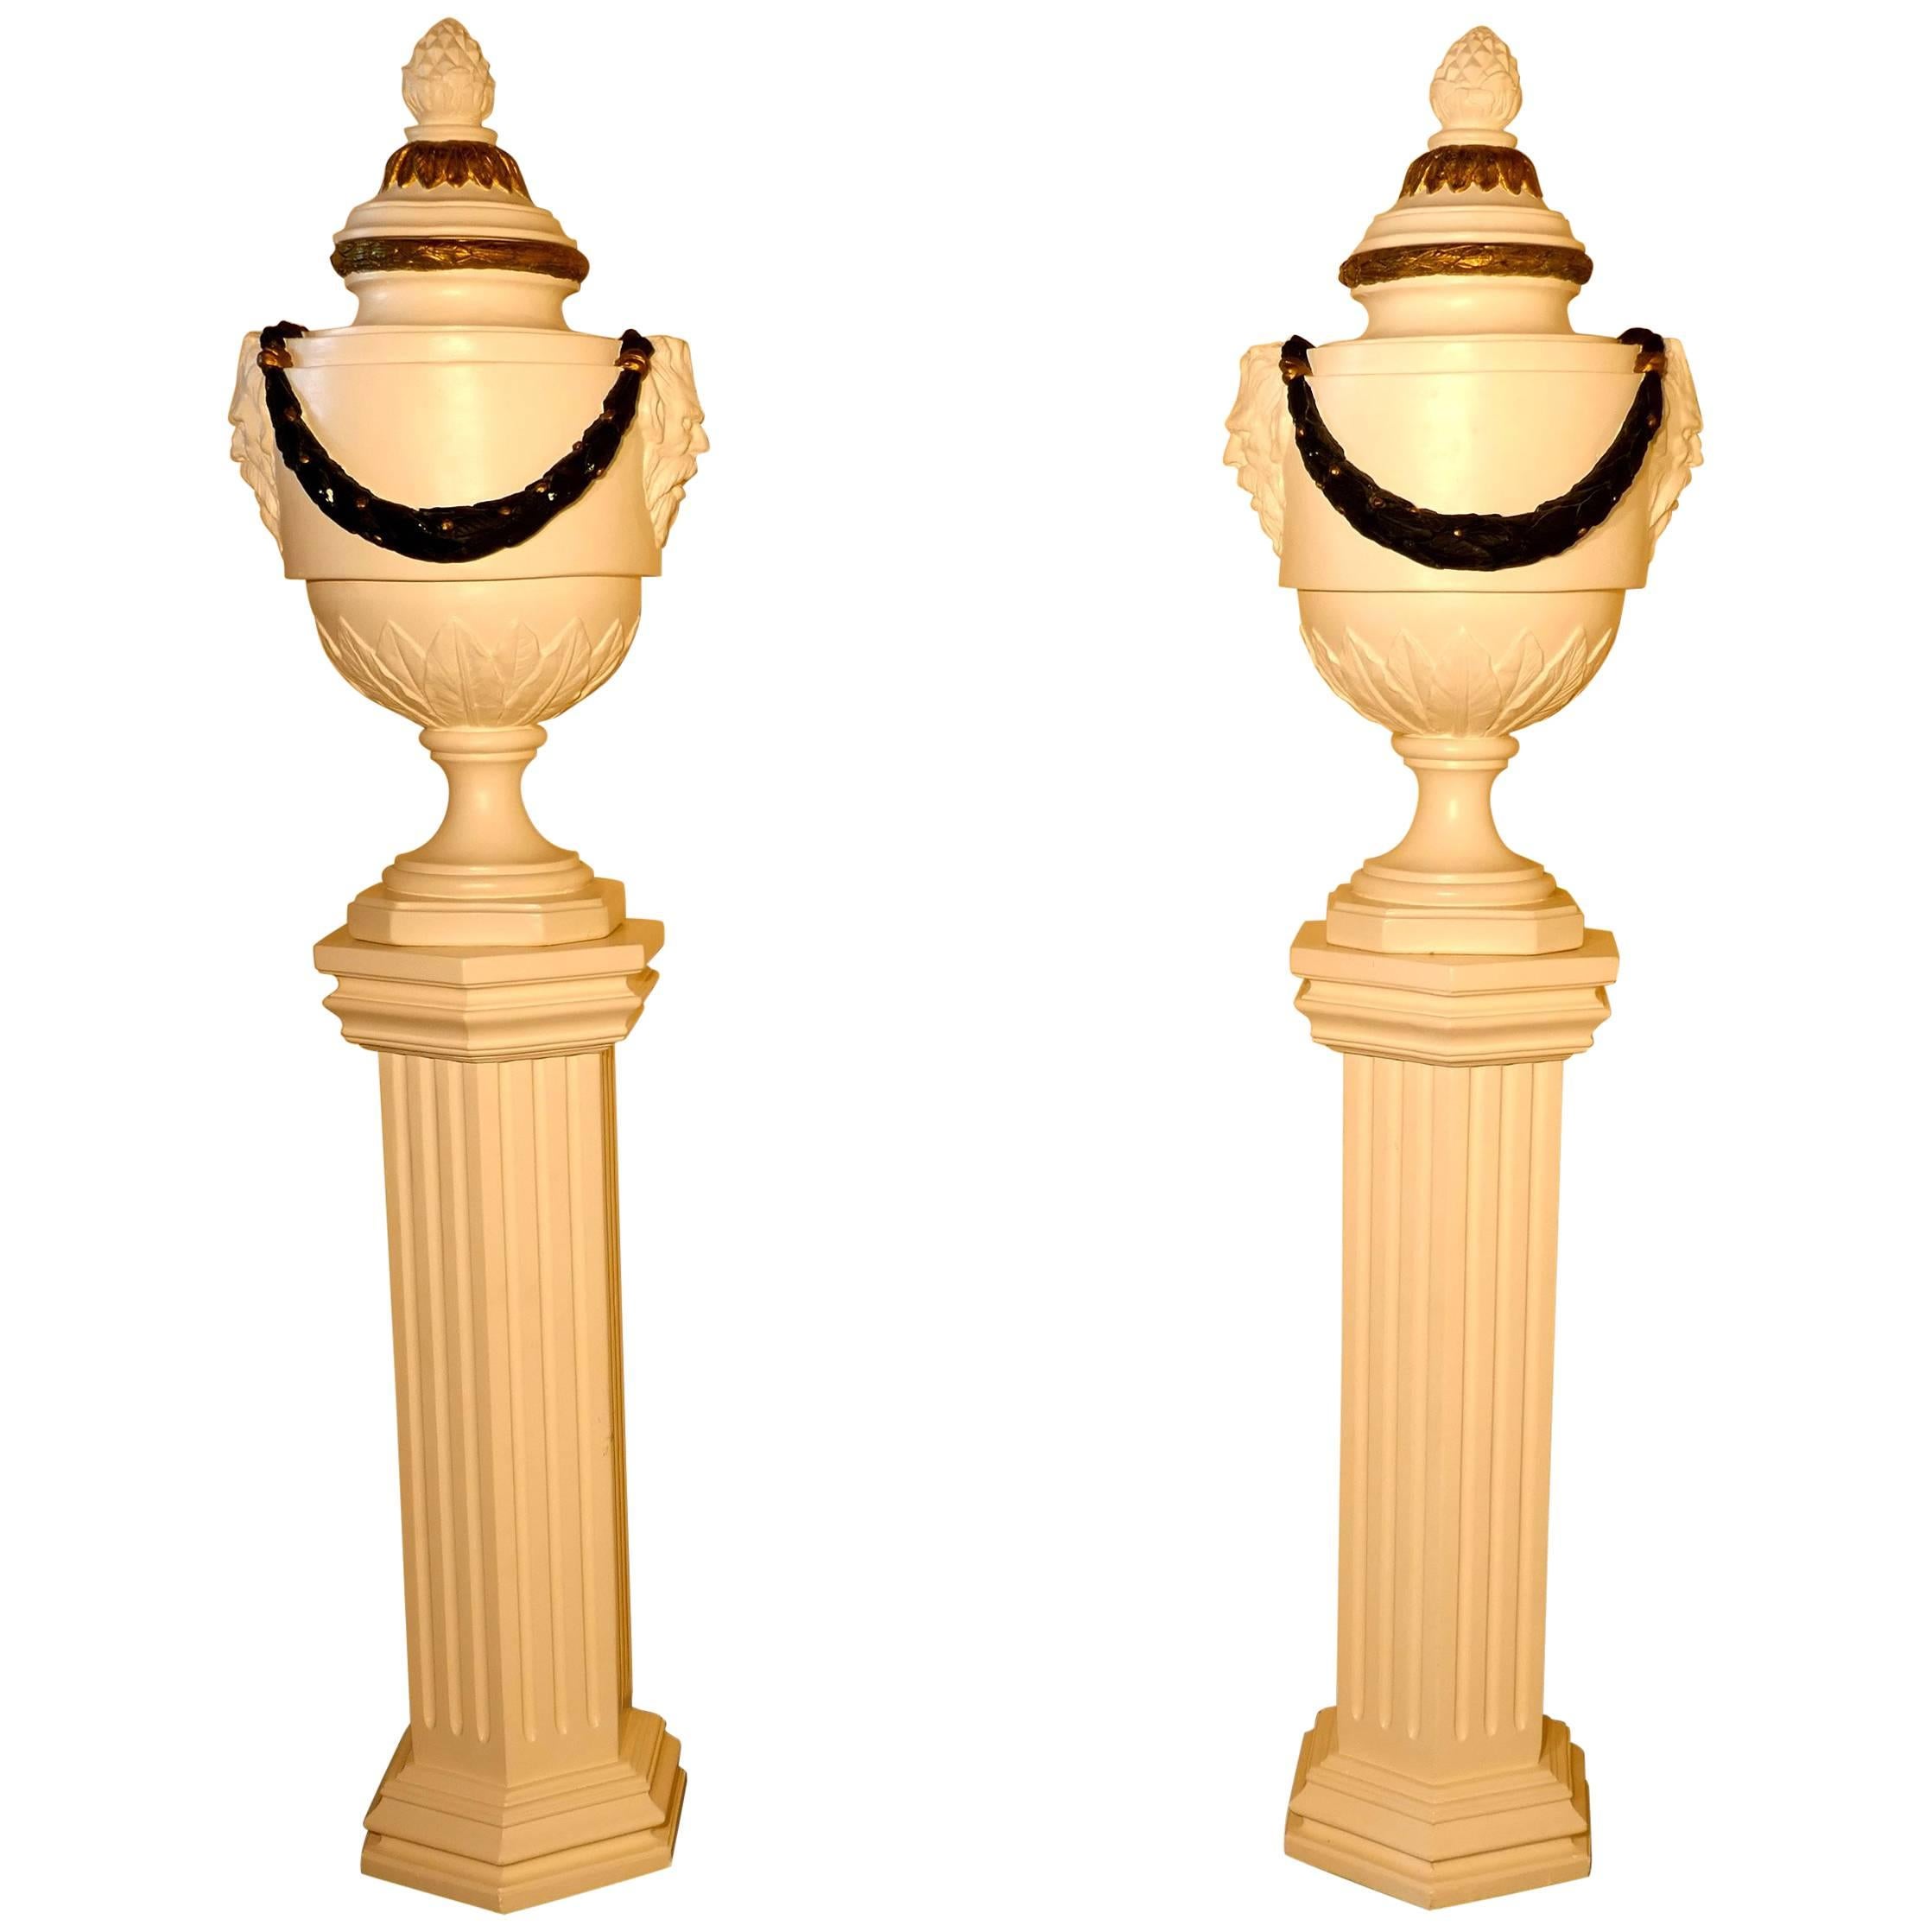 Pair of French Urns Set on Classical Column Pedestals